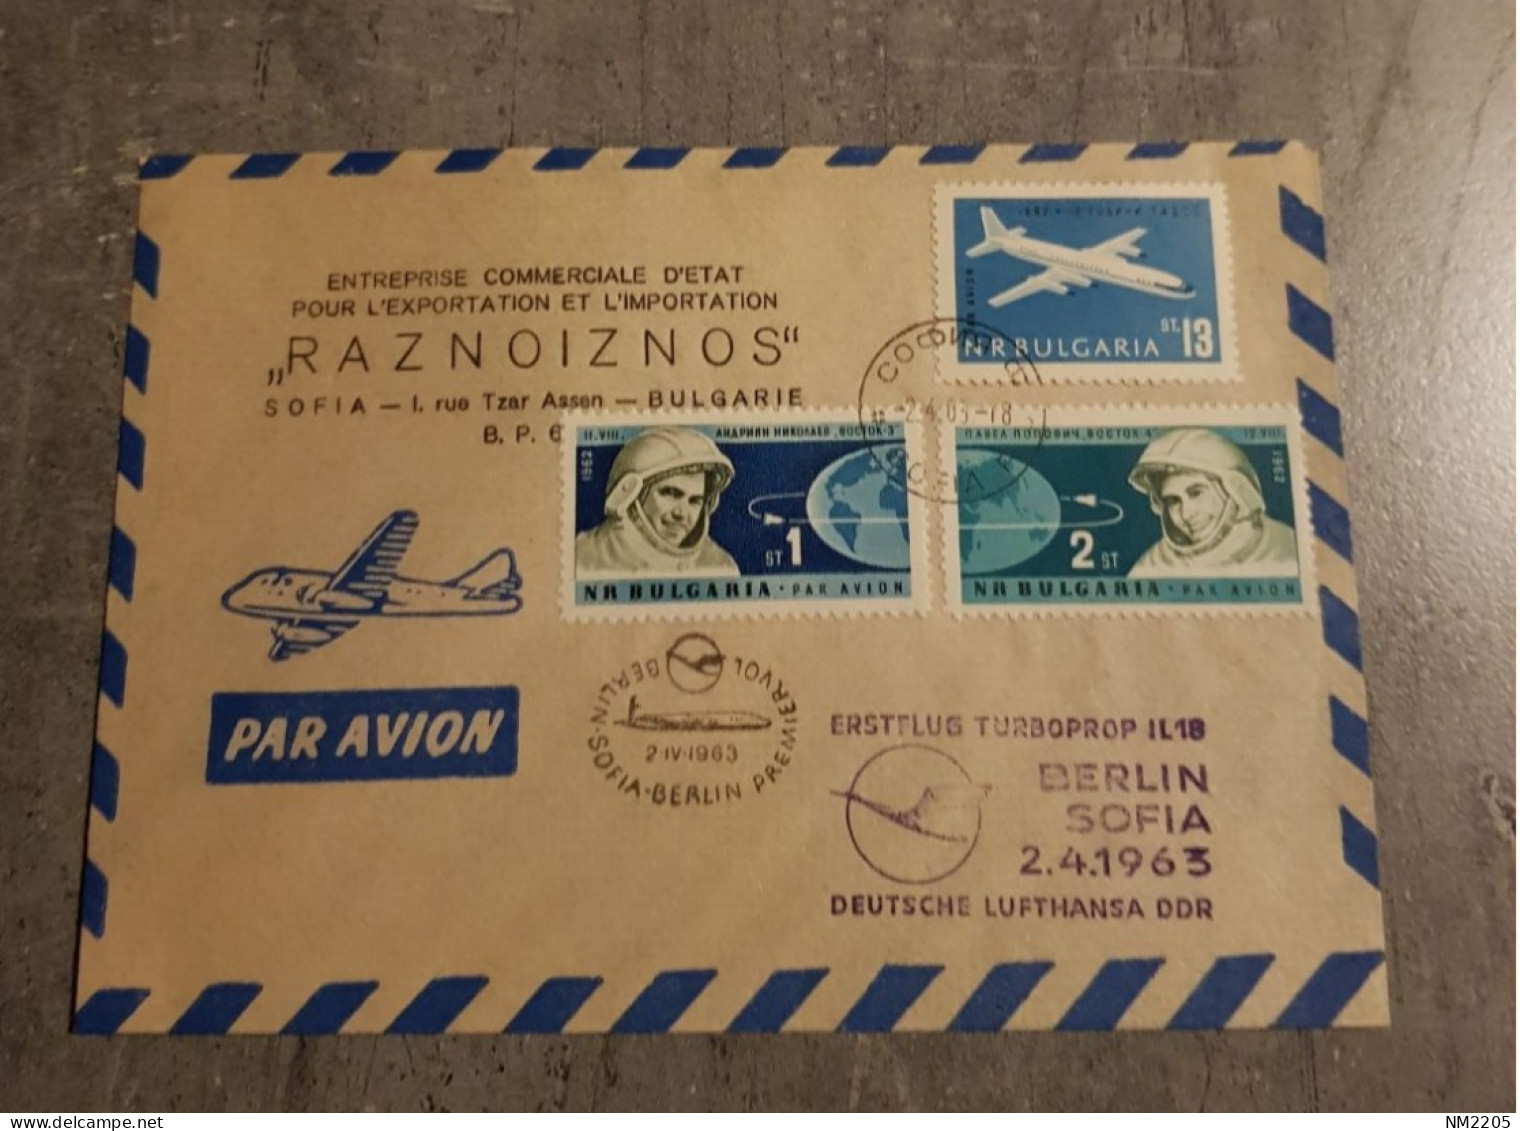 BULGARIA PAR AVION SPECIAL COVER "RAZNOIZNOS" SPACE-AVIATION CIRCULED WITH SPECIAL CANCELLED - Luftpost